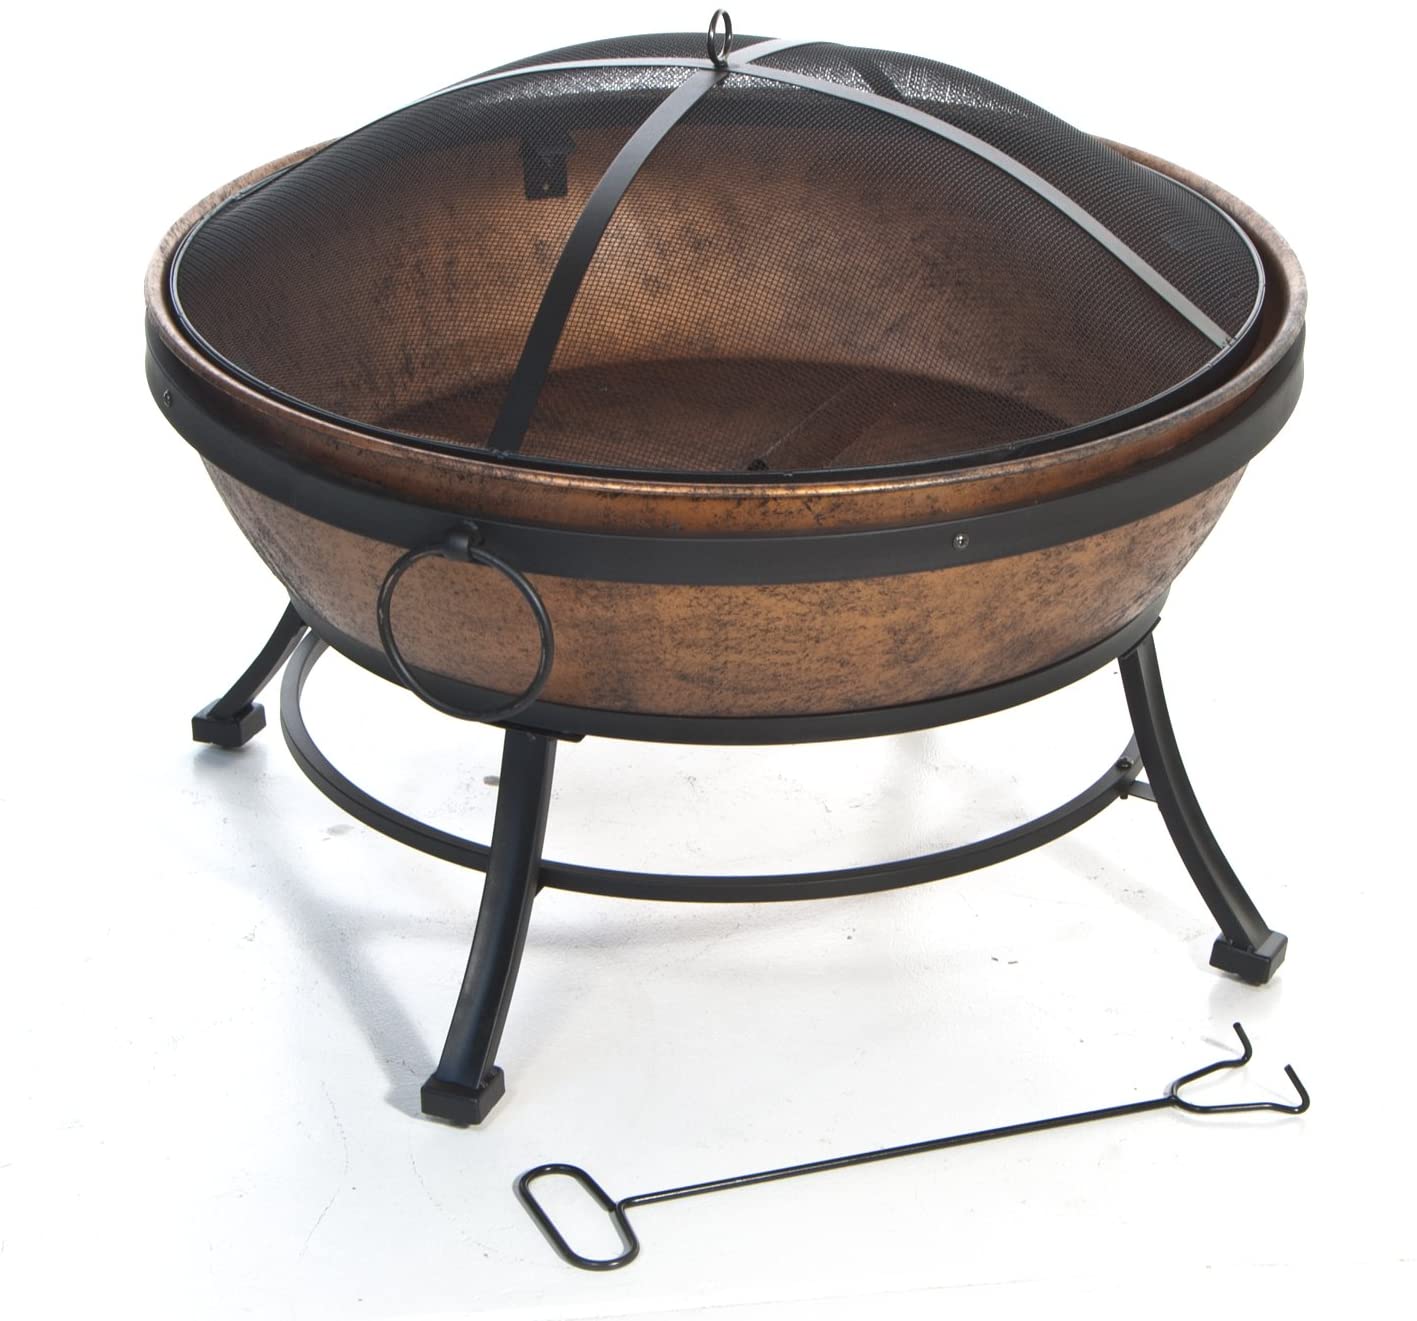 DeckMate Kay Home Products Avondale Steel Fire Bowl